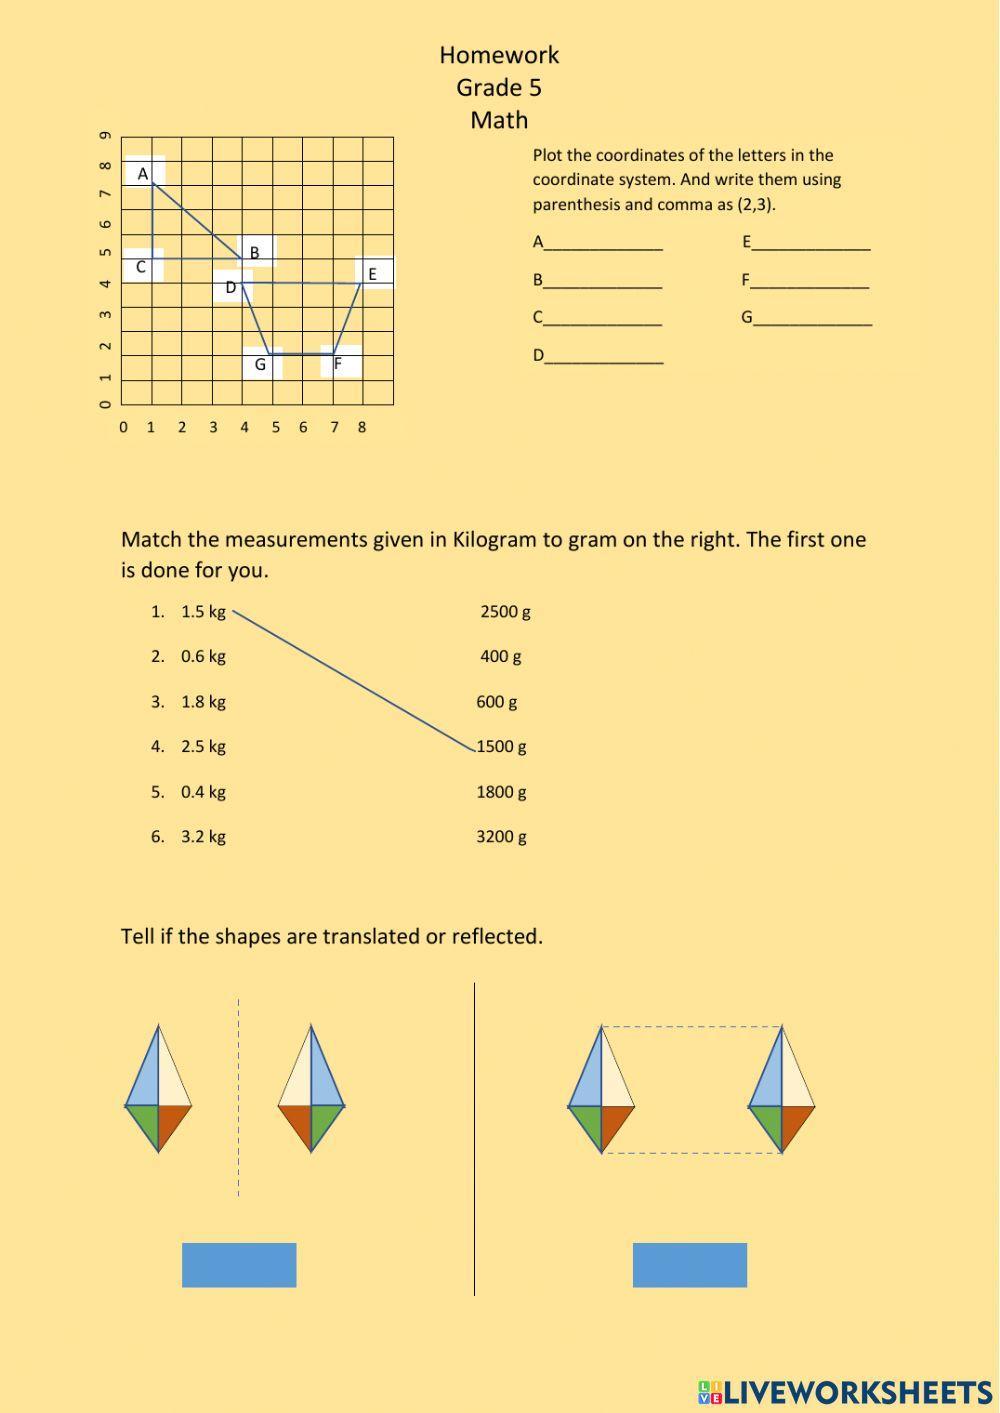 Coordinate system, measurement and shape movements